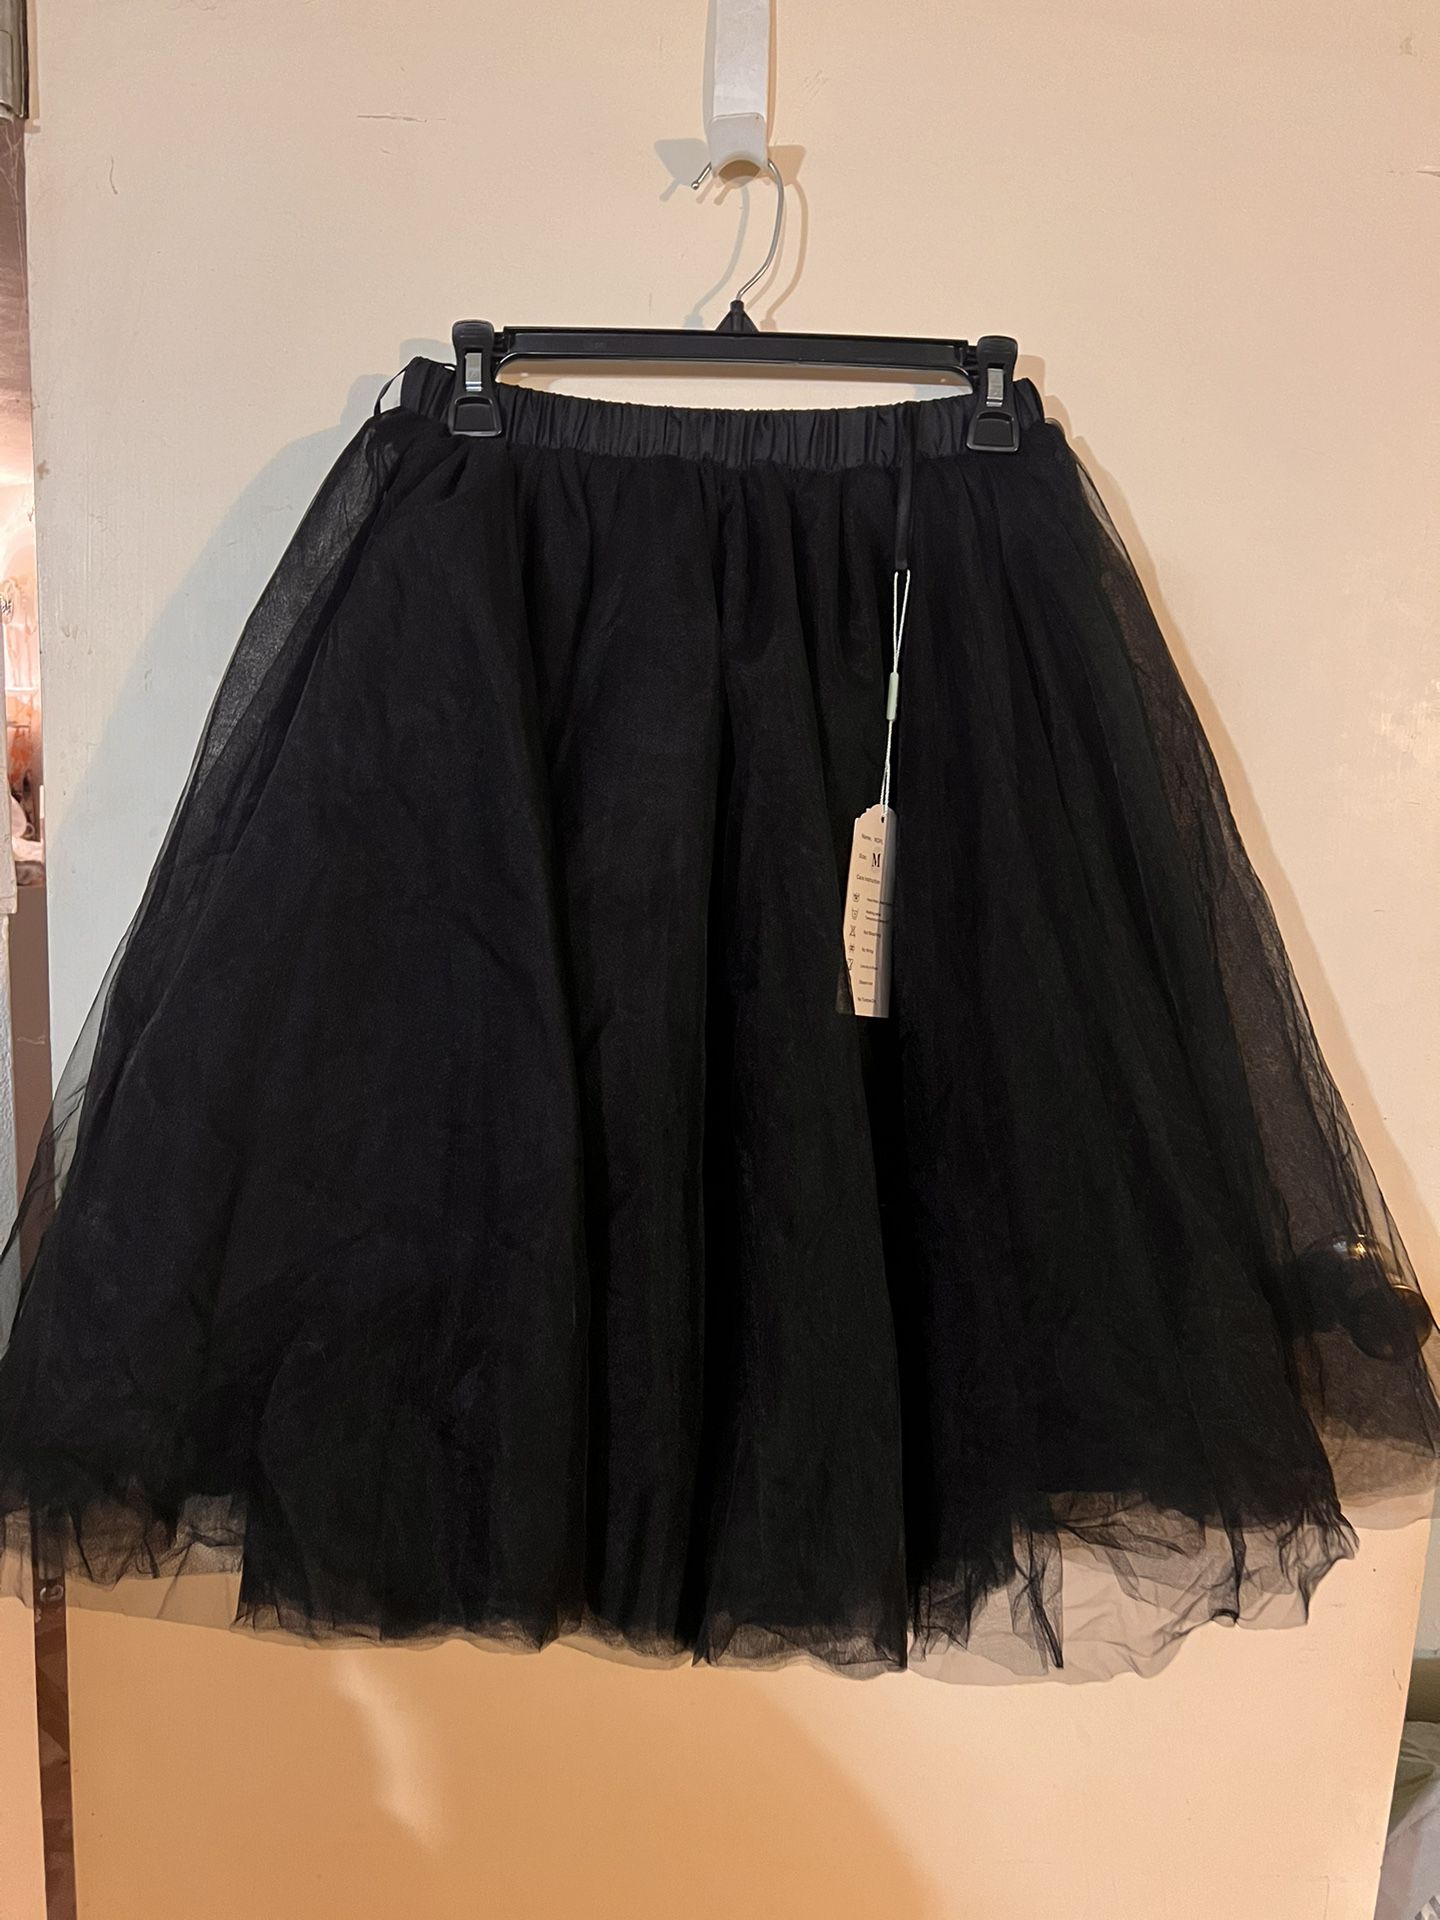 Black Tulle Skirt Sz M New With Tags